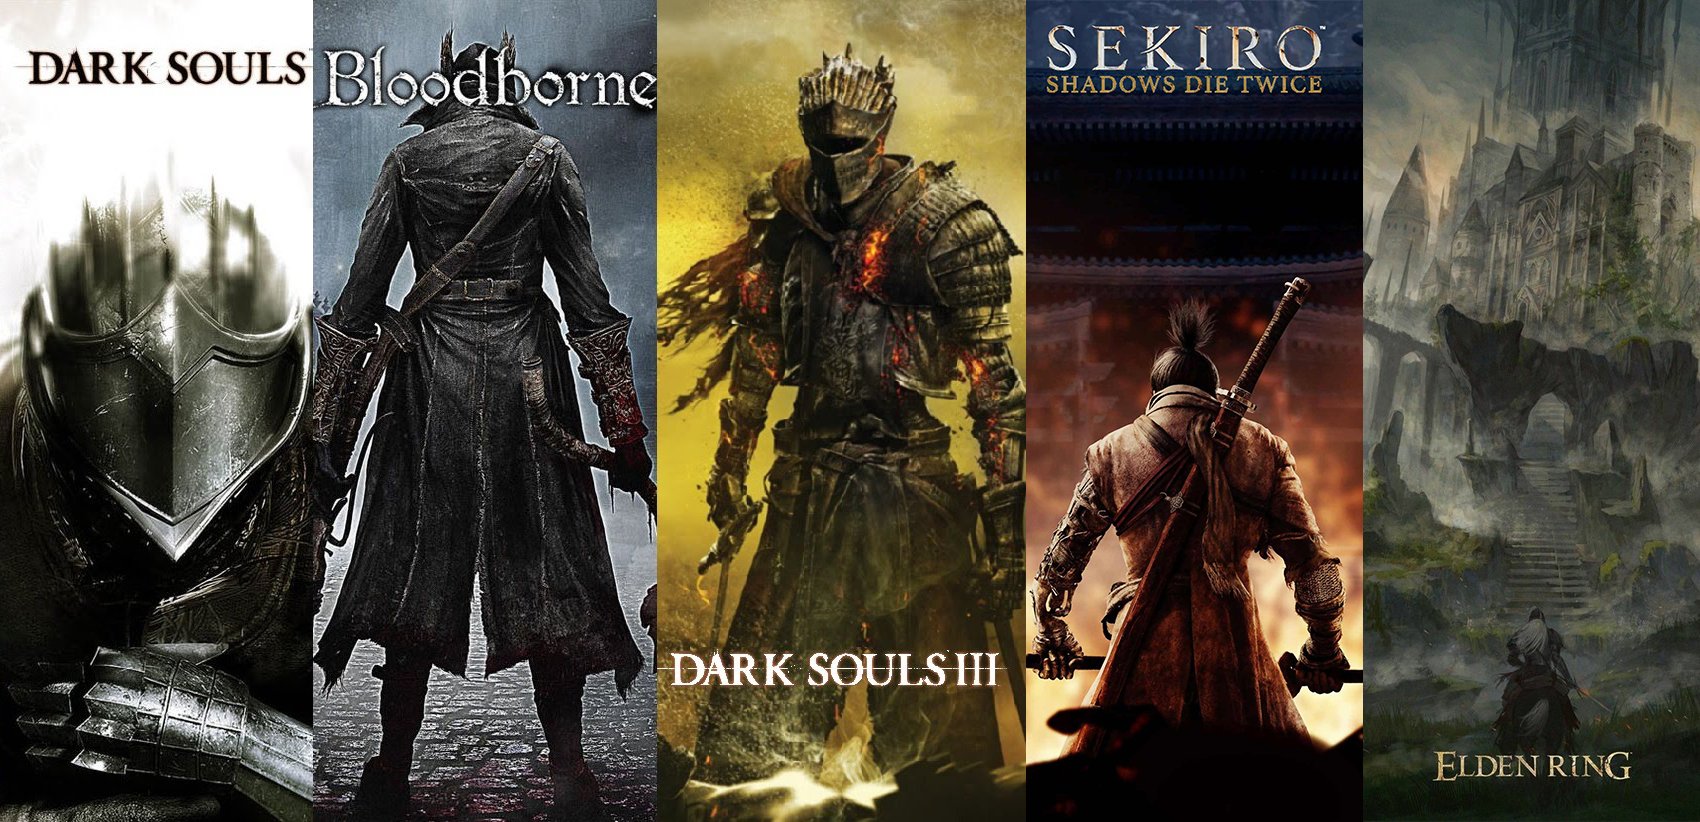 KAMI on X: From Software is one of the best game developers in